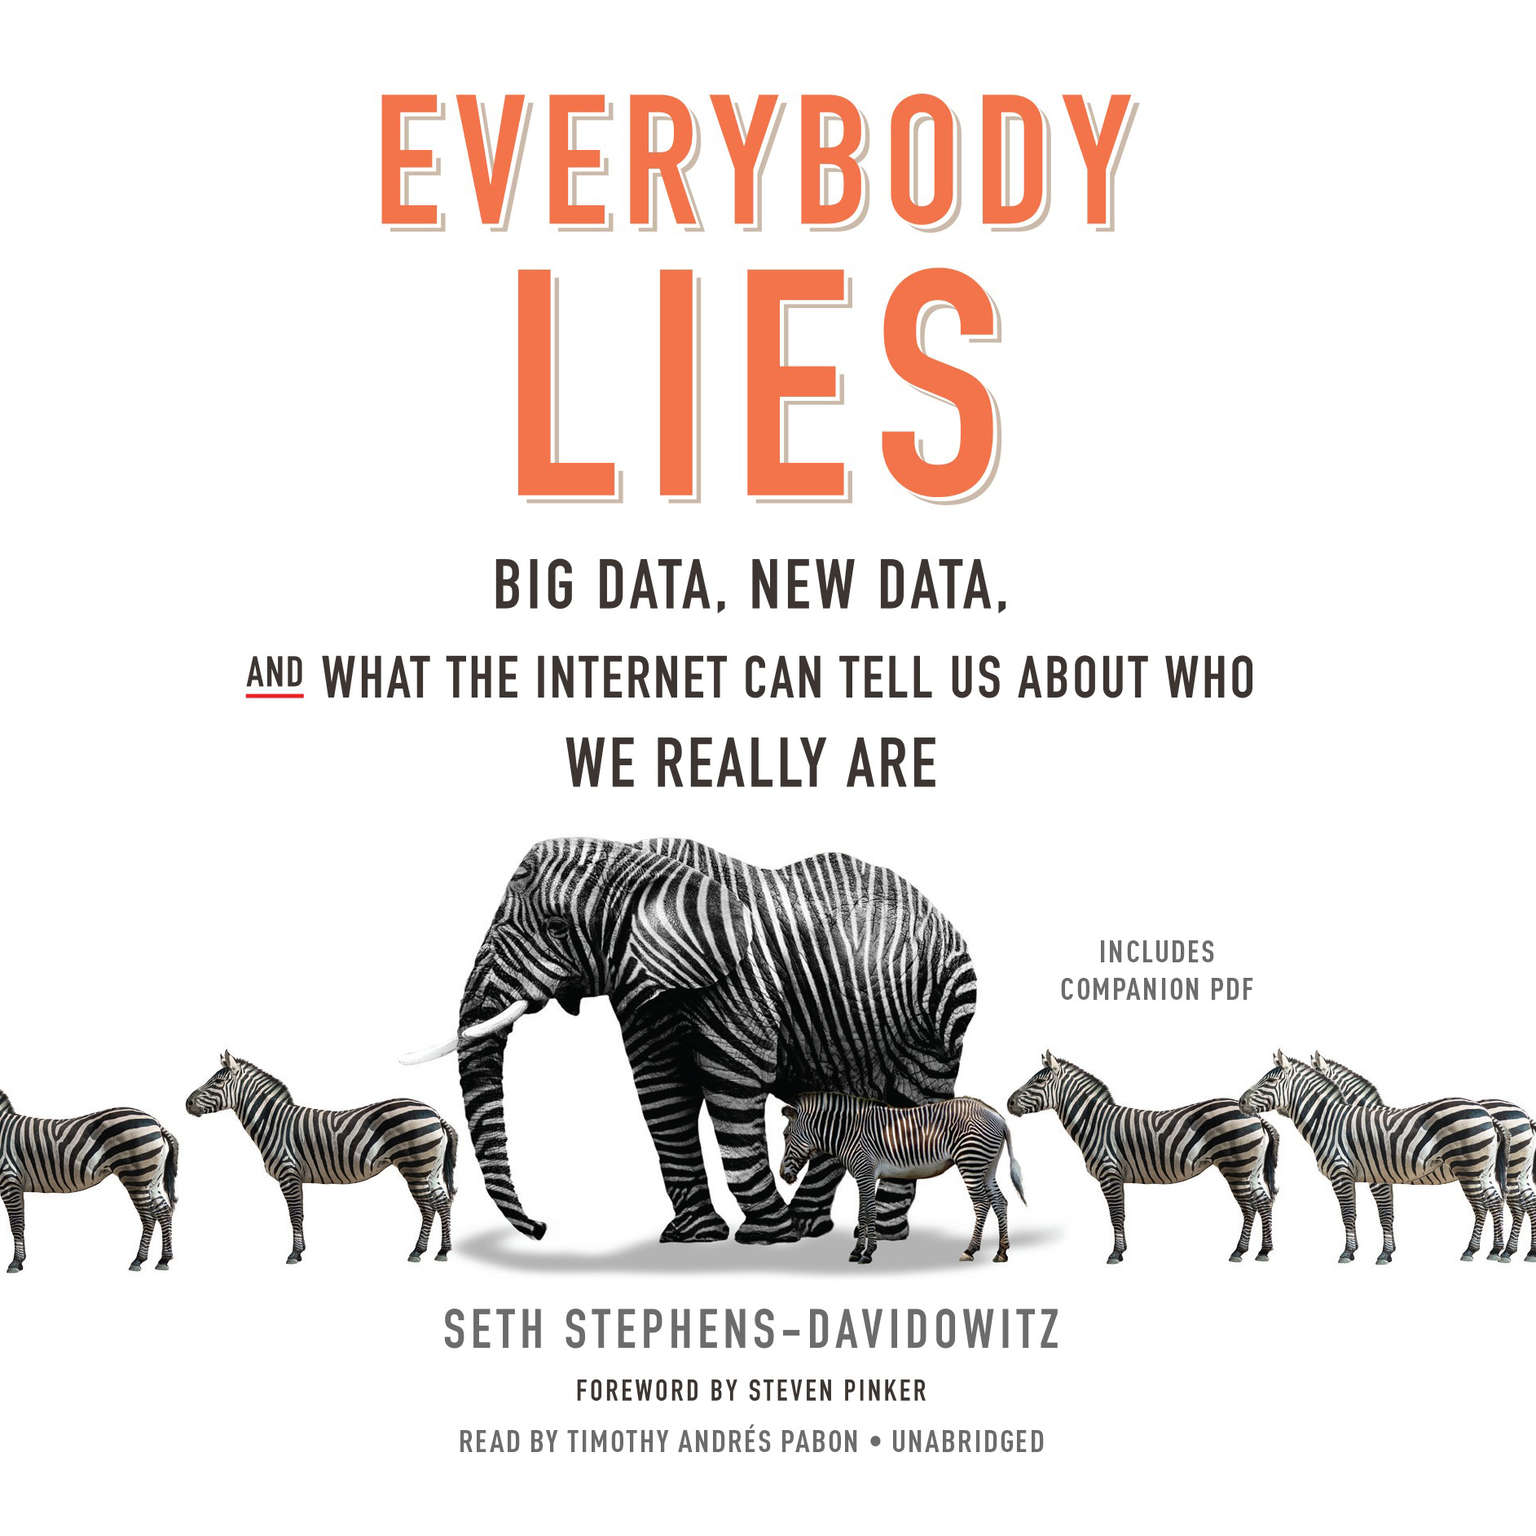 Cover image for the book 'Everybody Lies'